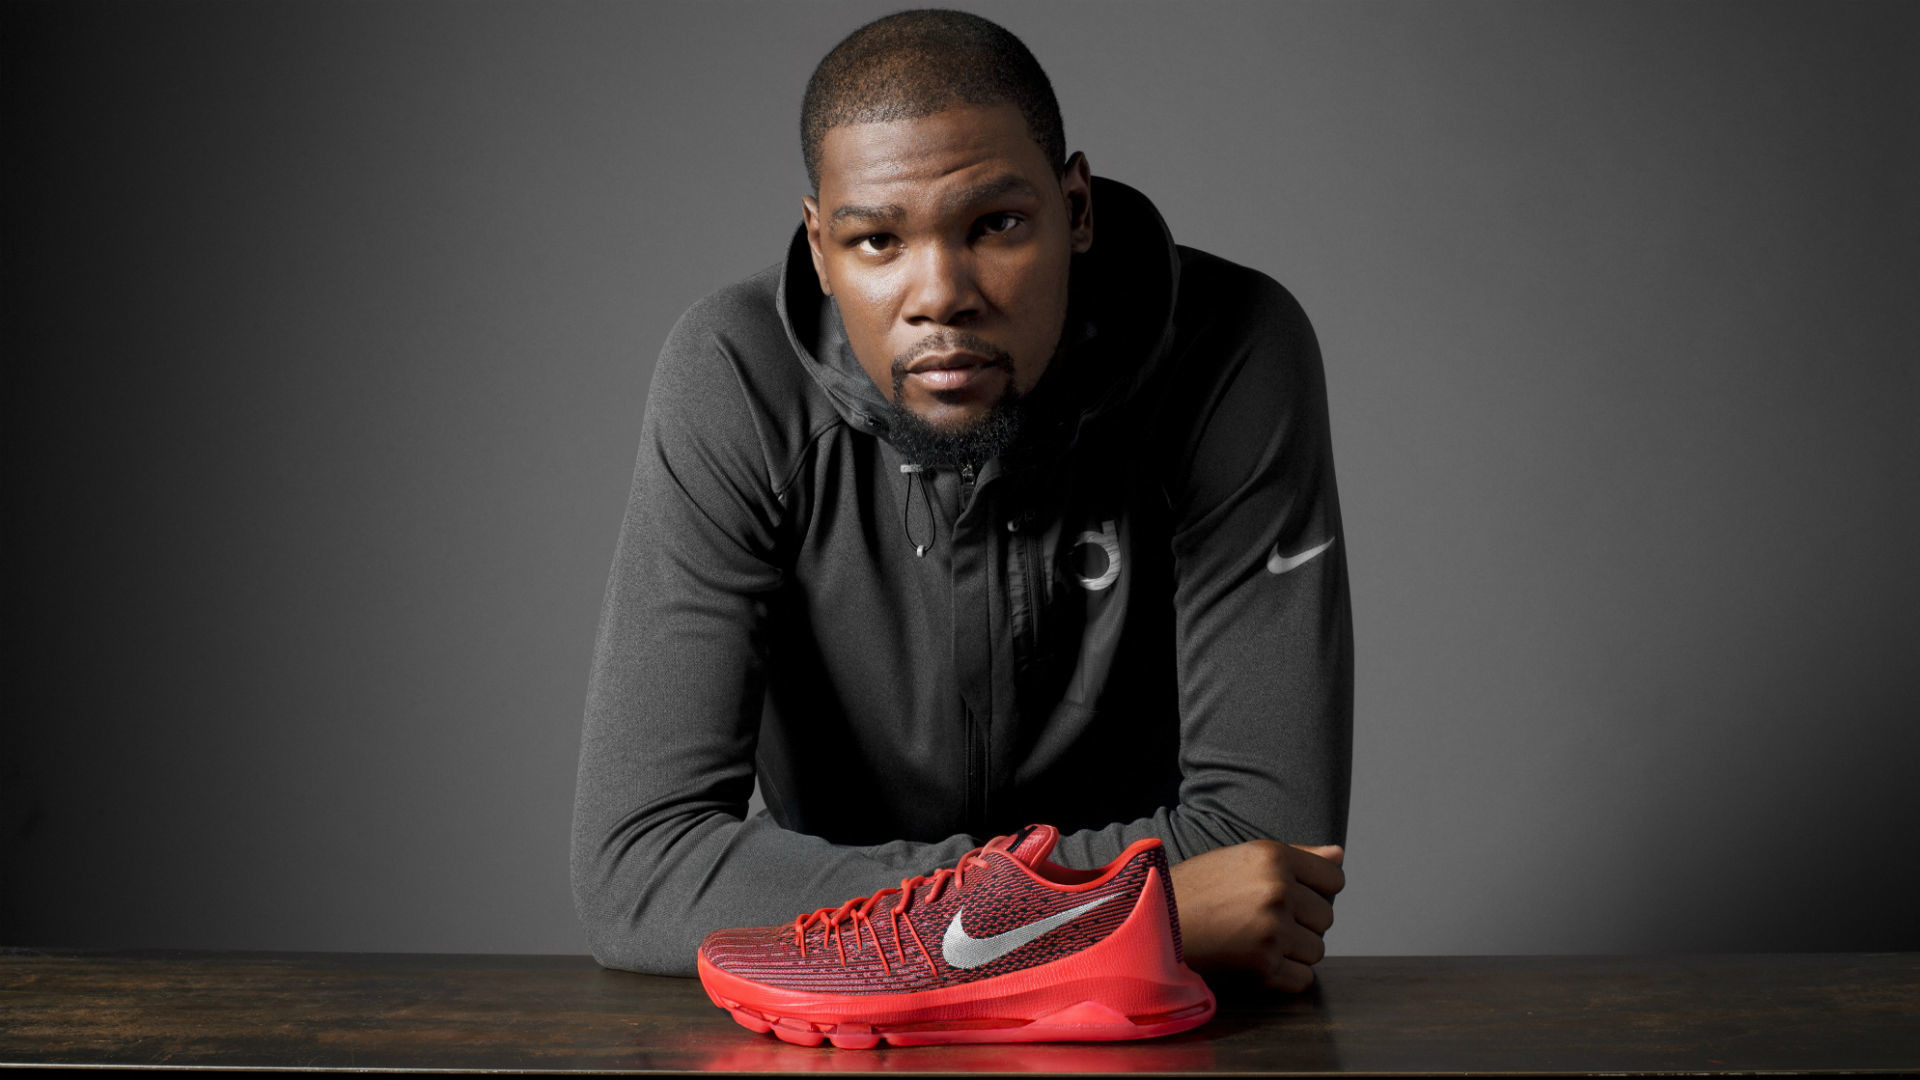 1920x1080 When does the Nike KD8 V8 colorway release?